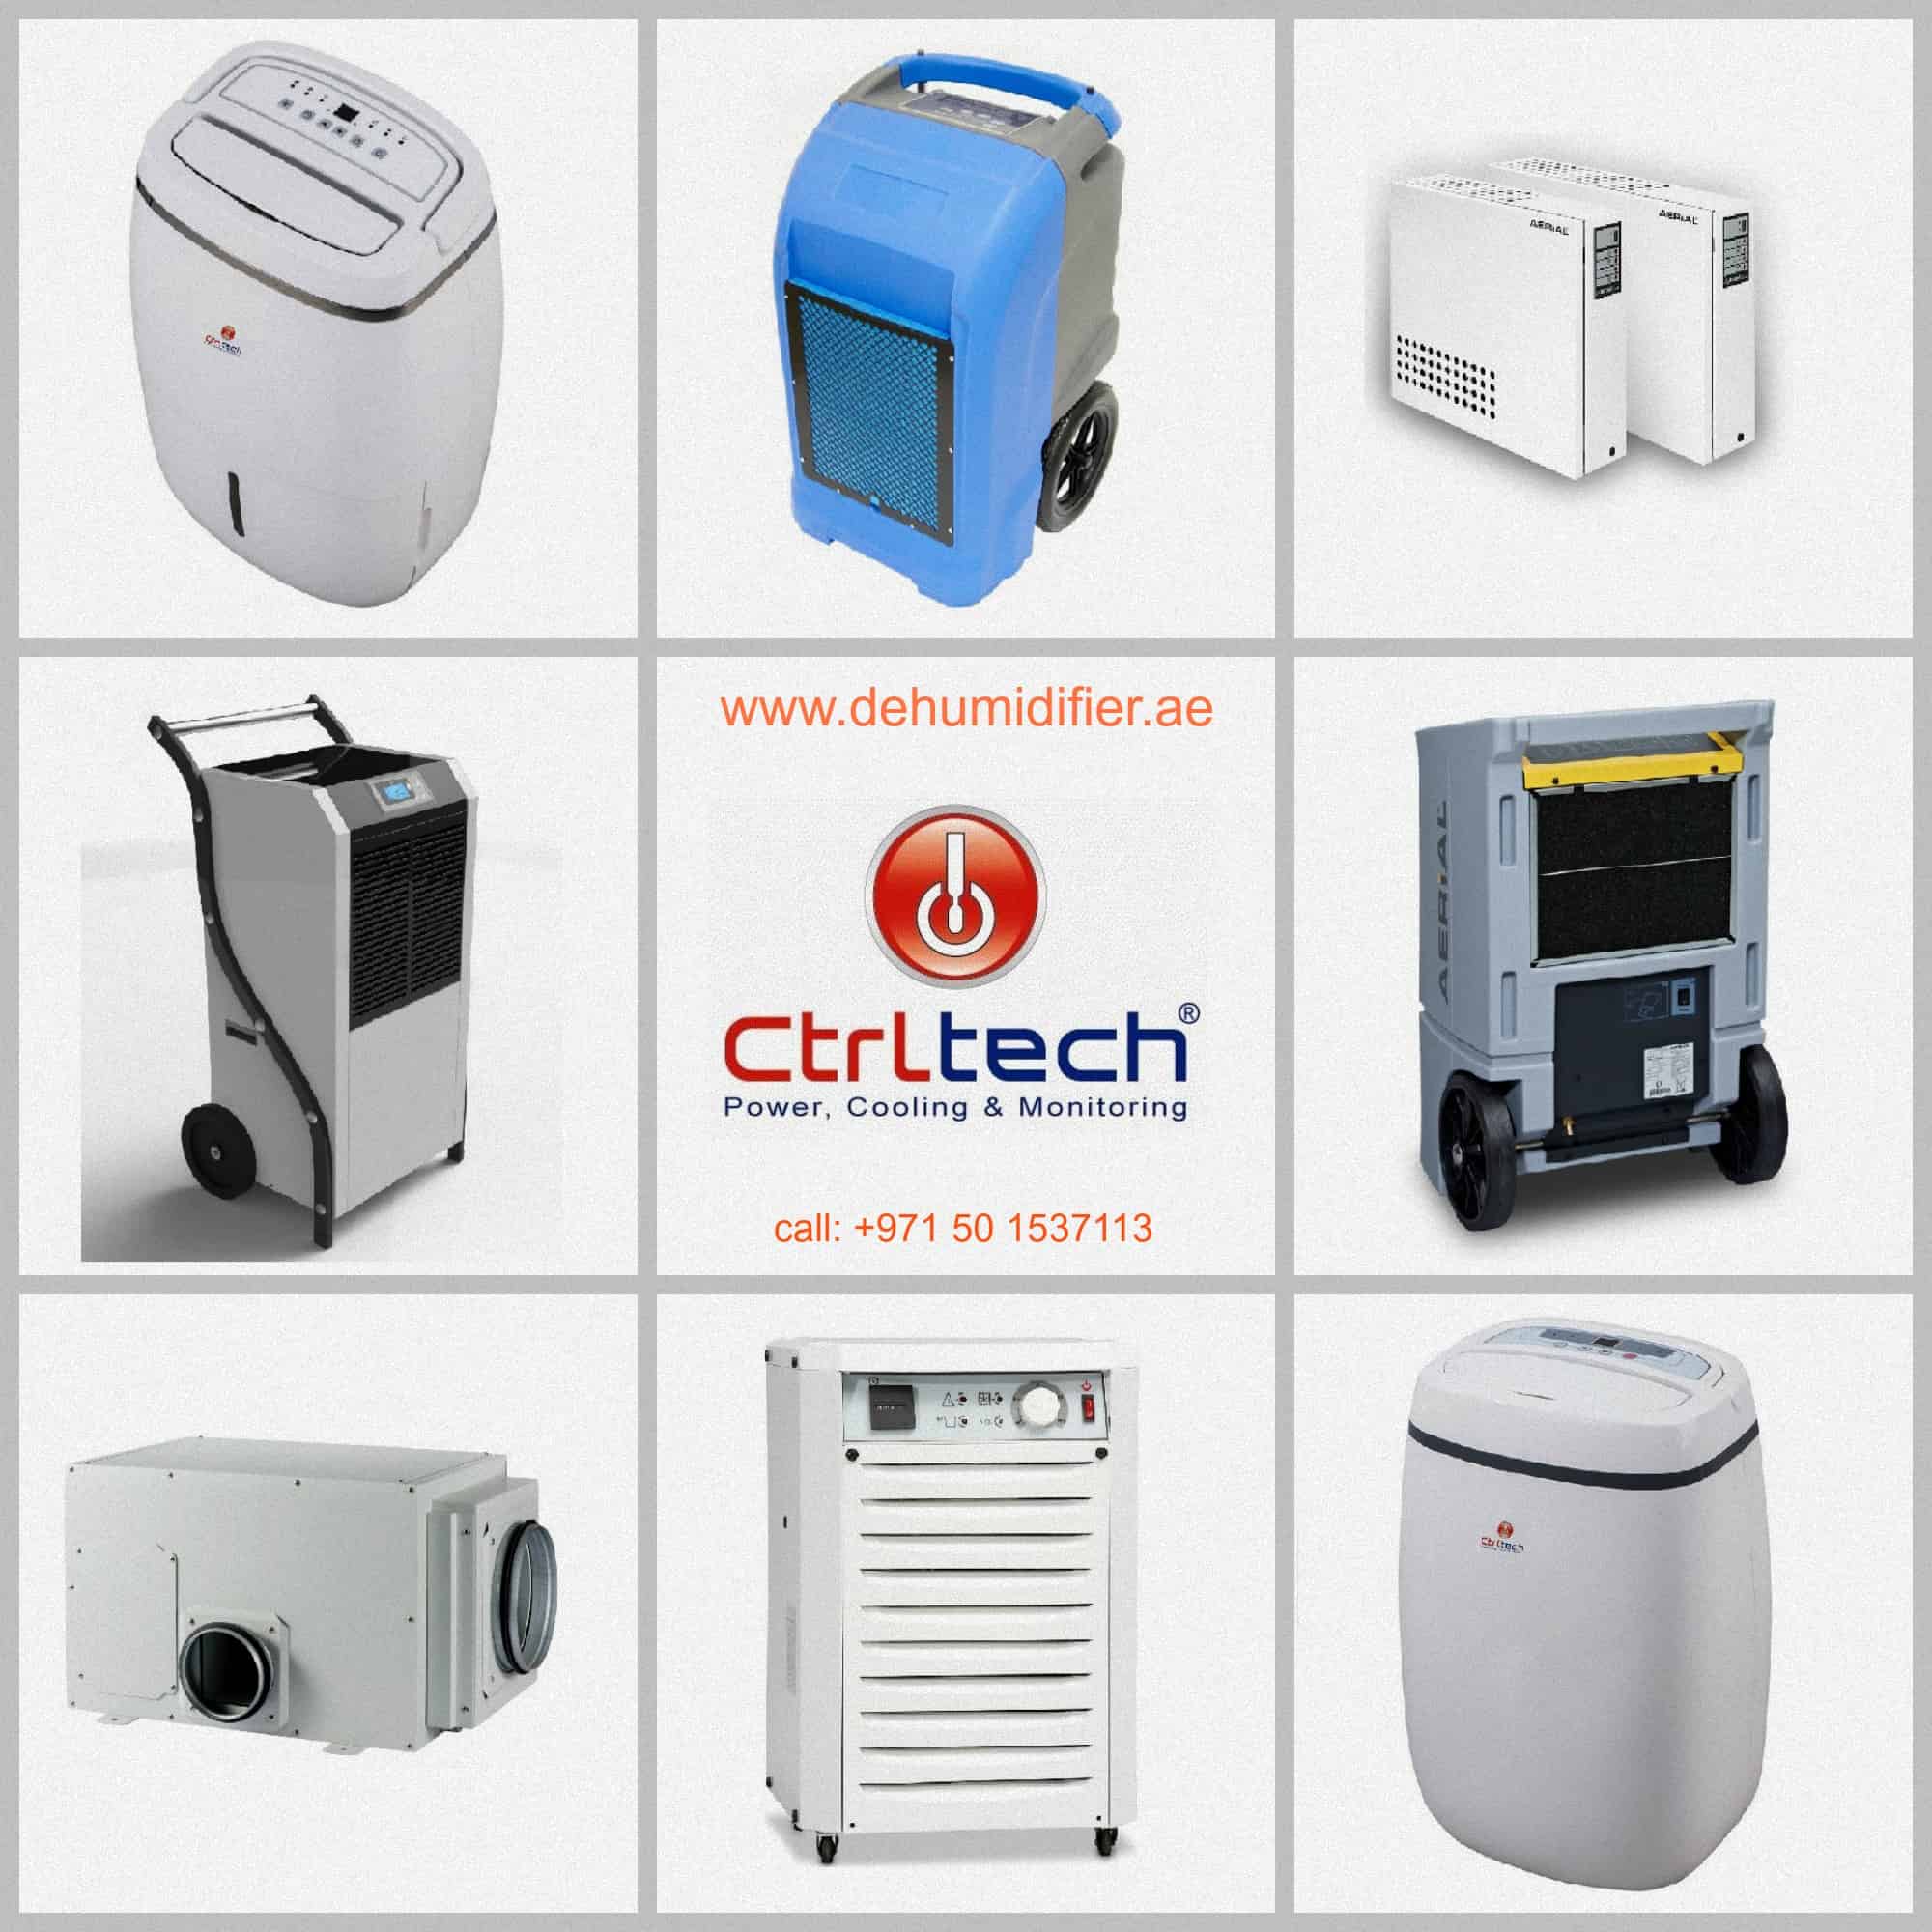 all model of poratable dehumidifier and industrial dehumidifier for humidity control.